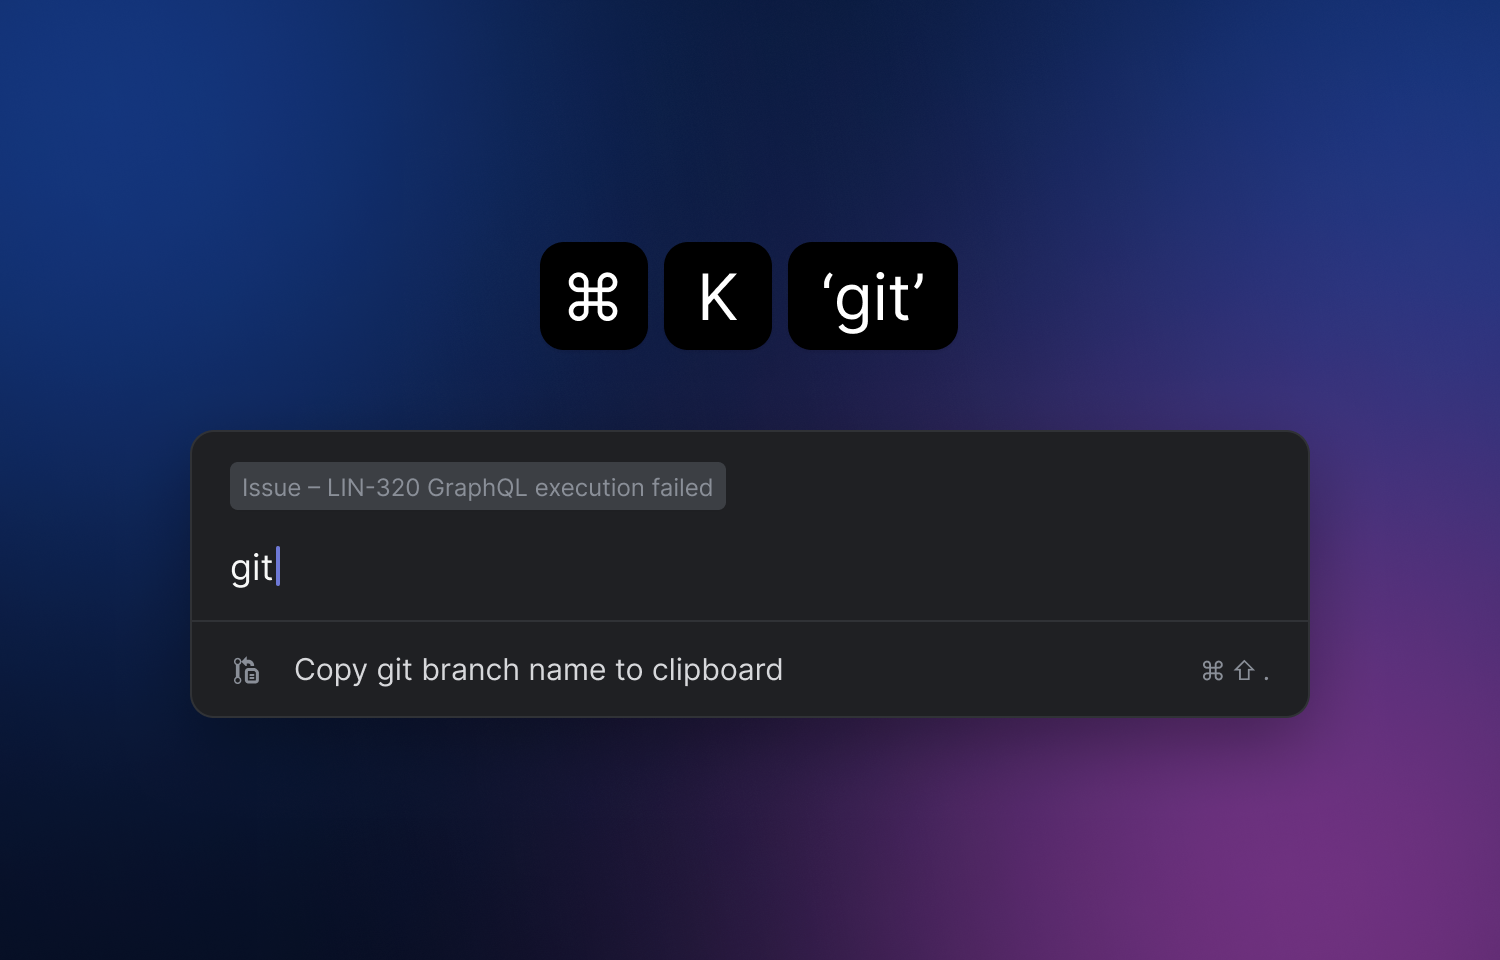 Searching "git" in the command menu, with a resulting item "copy git branch name to clipboard".